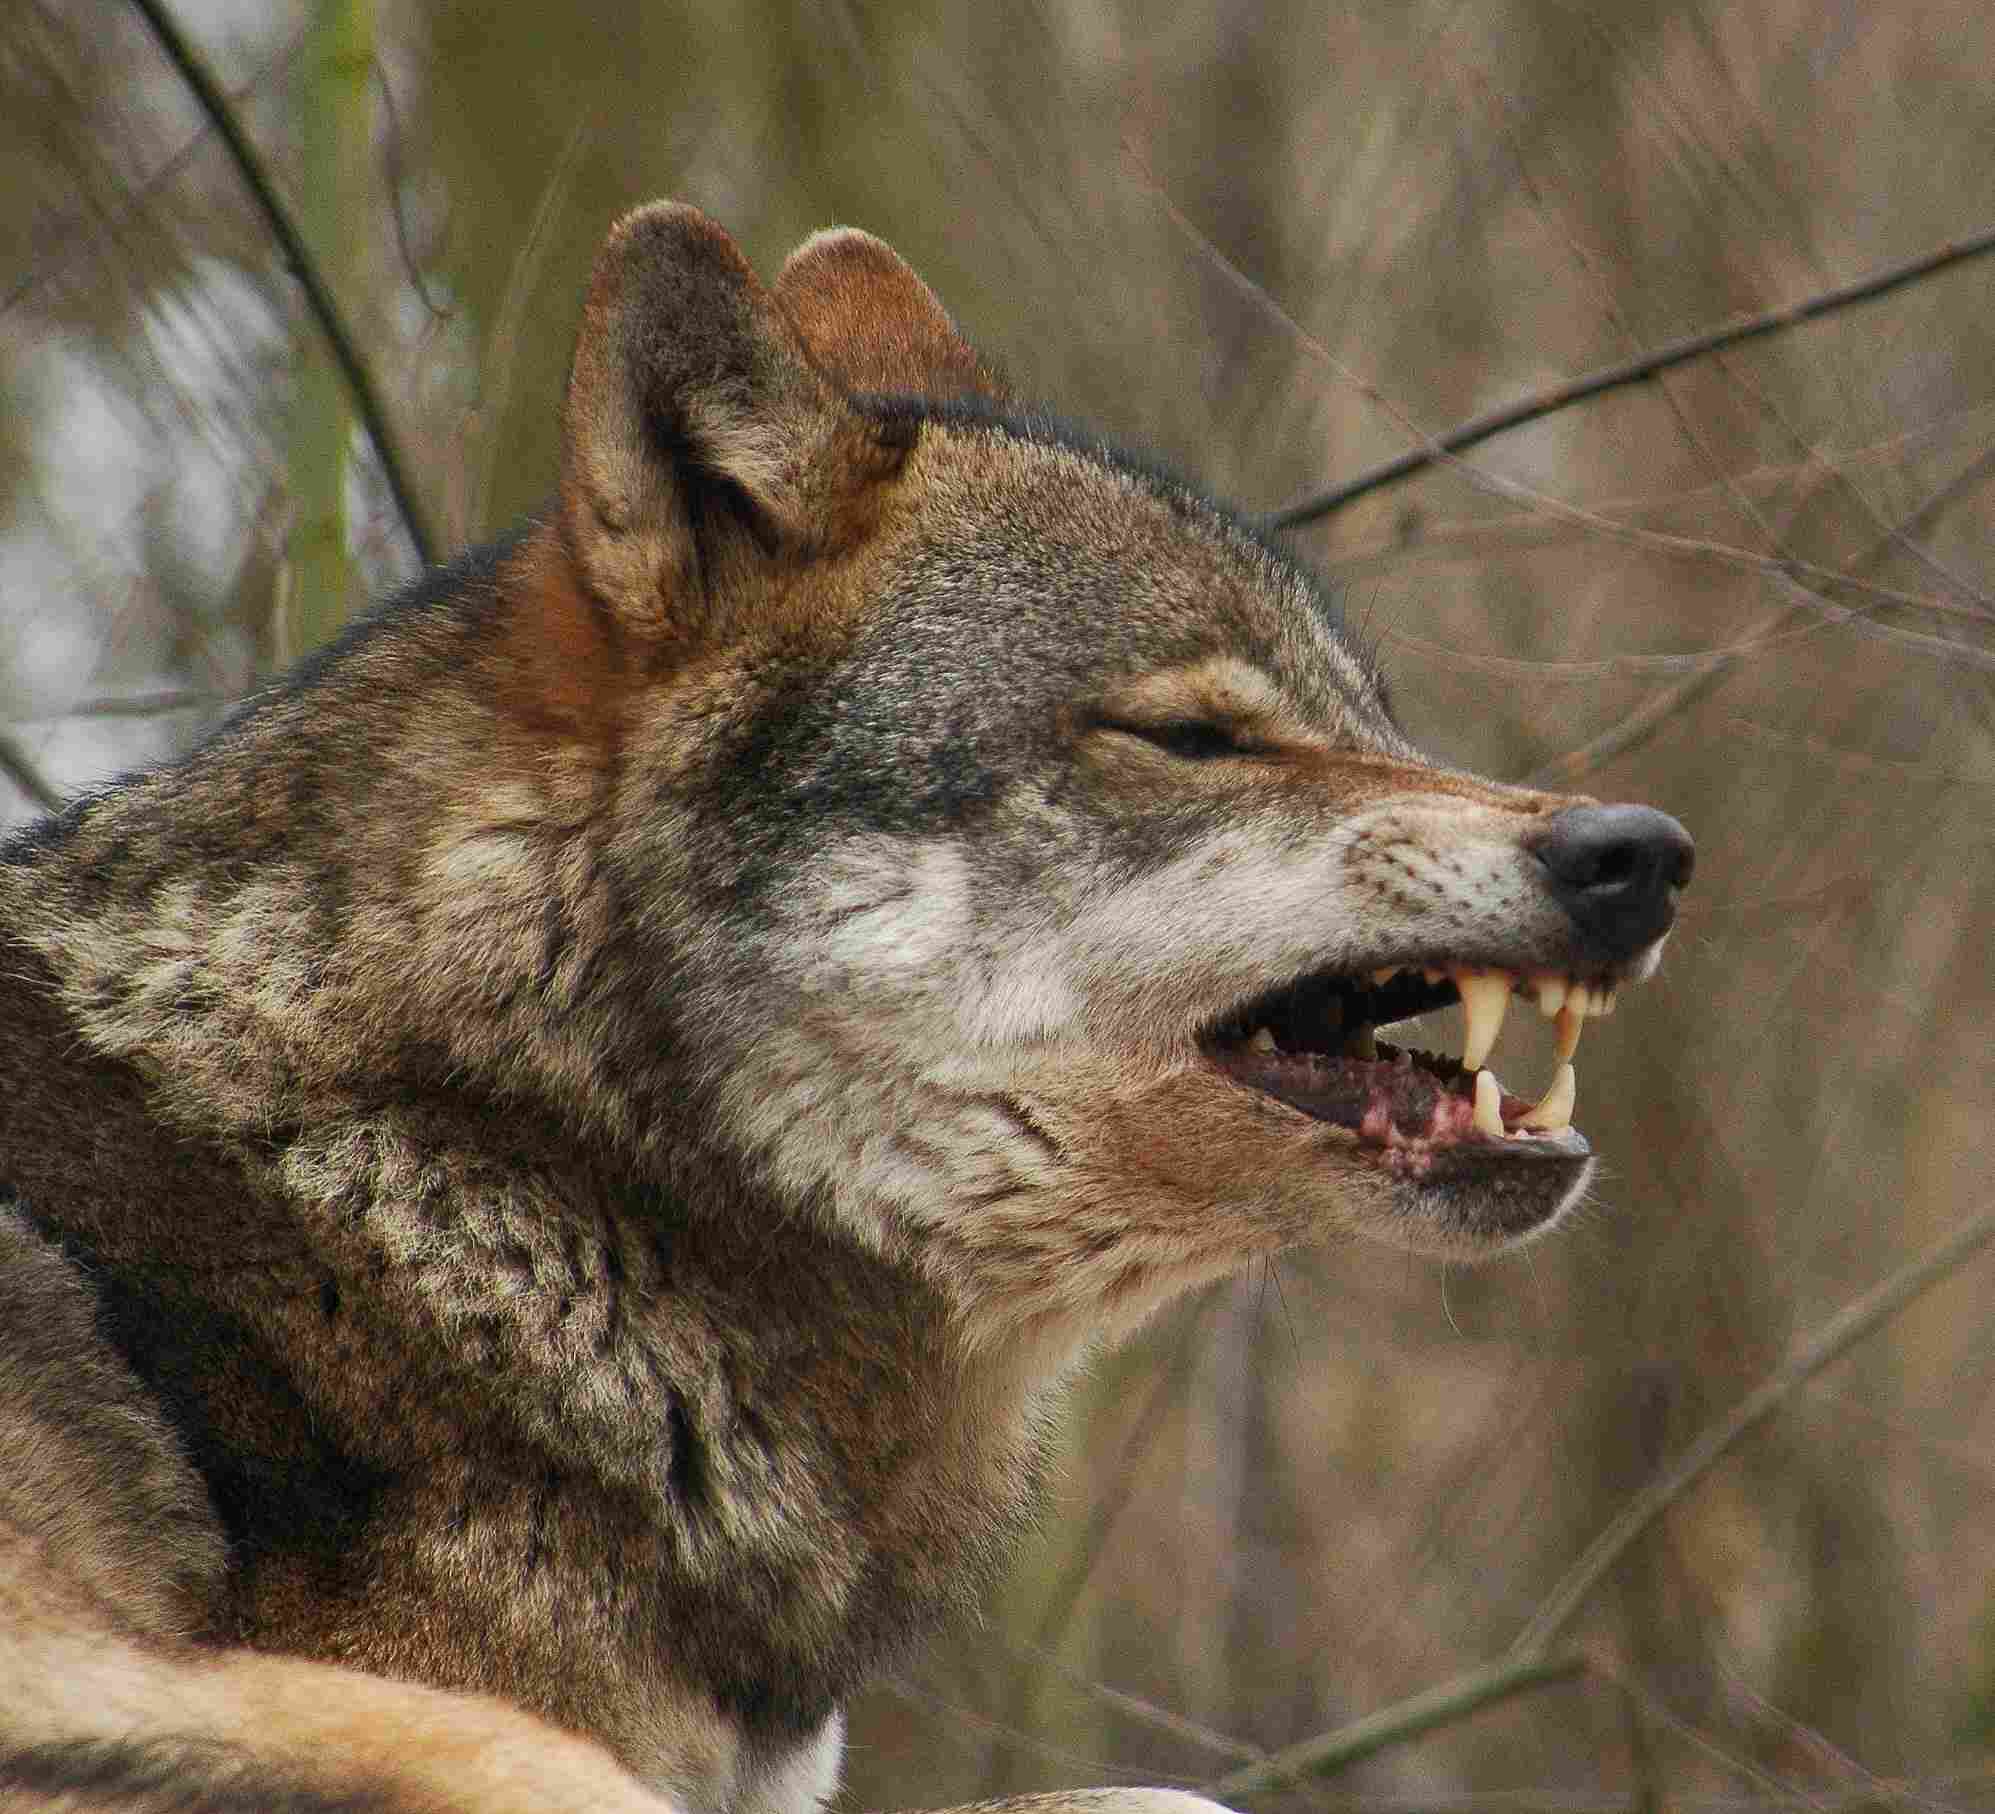 Wolf Vs Husky: The Danger Posed by Wolves (to Humans) is Higher Than for Huskies (Credit: Kristi Herbert 2006, Uploaded Online 2007 .CC BY 2.0.)